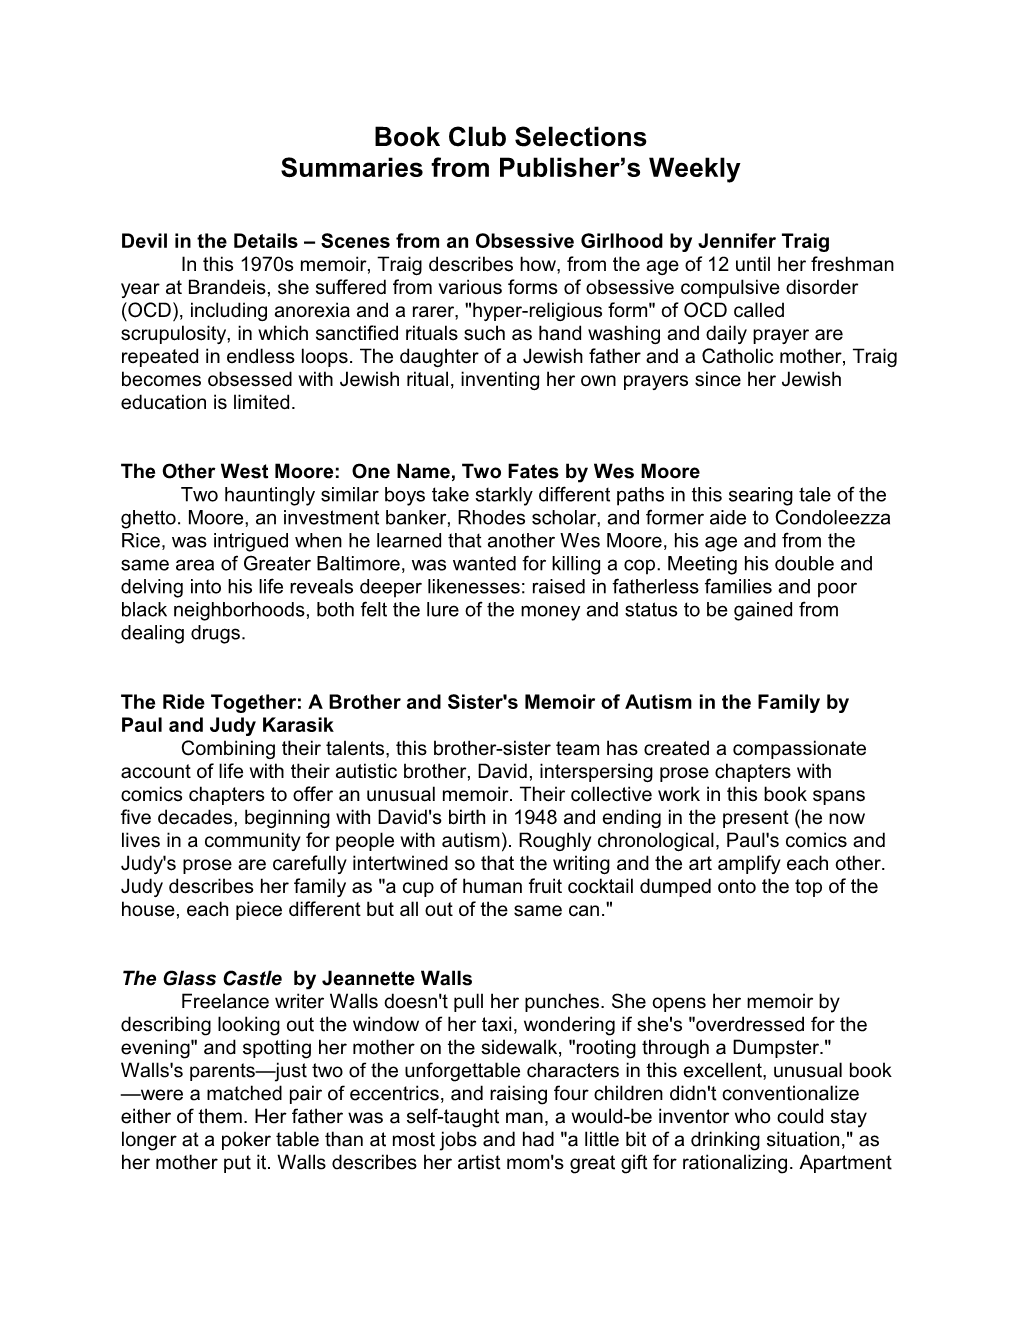 Summaries from Publisher S Weekly